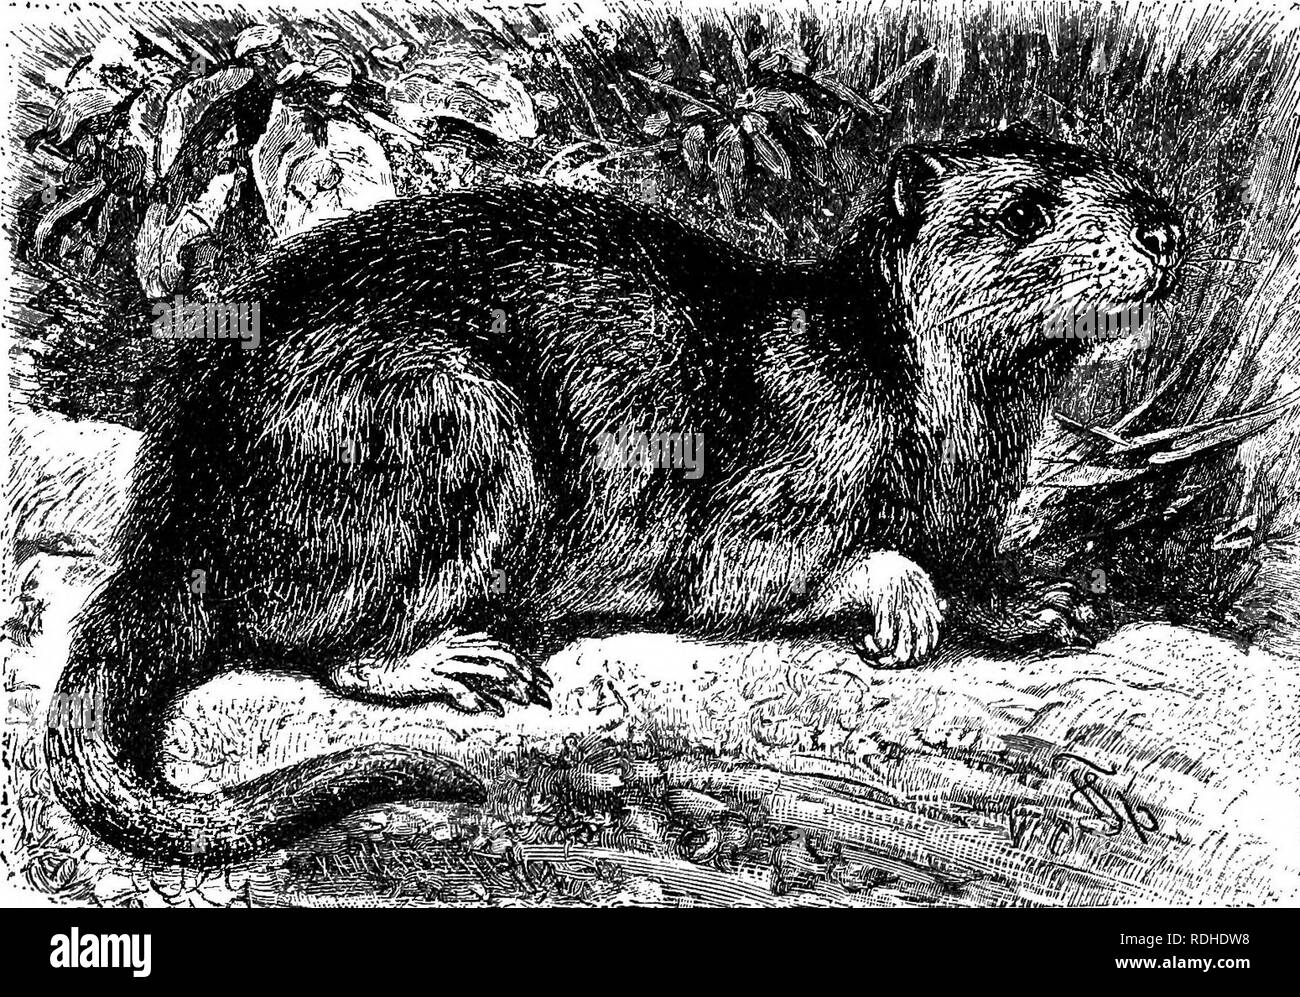 . The animals of the world. Brehm's life of animals;. Mammals. ^^a'i/!'/iinid,.ia THE TUCO-TDCO. A member of the Octodon family of Rodents which forms a distinct genus is an inhabitant of Patagonia, called by the native tribes Tuco-tuco. It has five toes on each foot, the innermost toe being much shorter than the other four. It measures about ten inches, of whidh about two and a half inches belong to the tail. The fur is brownish gray tinged with yellow, and lighter on the under portion. It inhabits the plains of Patagonia north of the Rio Colorado, where it lives in burrows. {Cienotnys magell Stock Photo